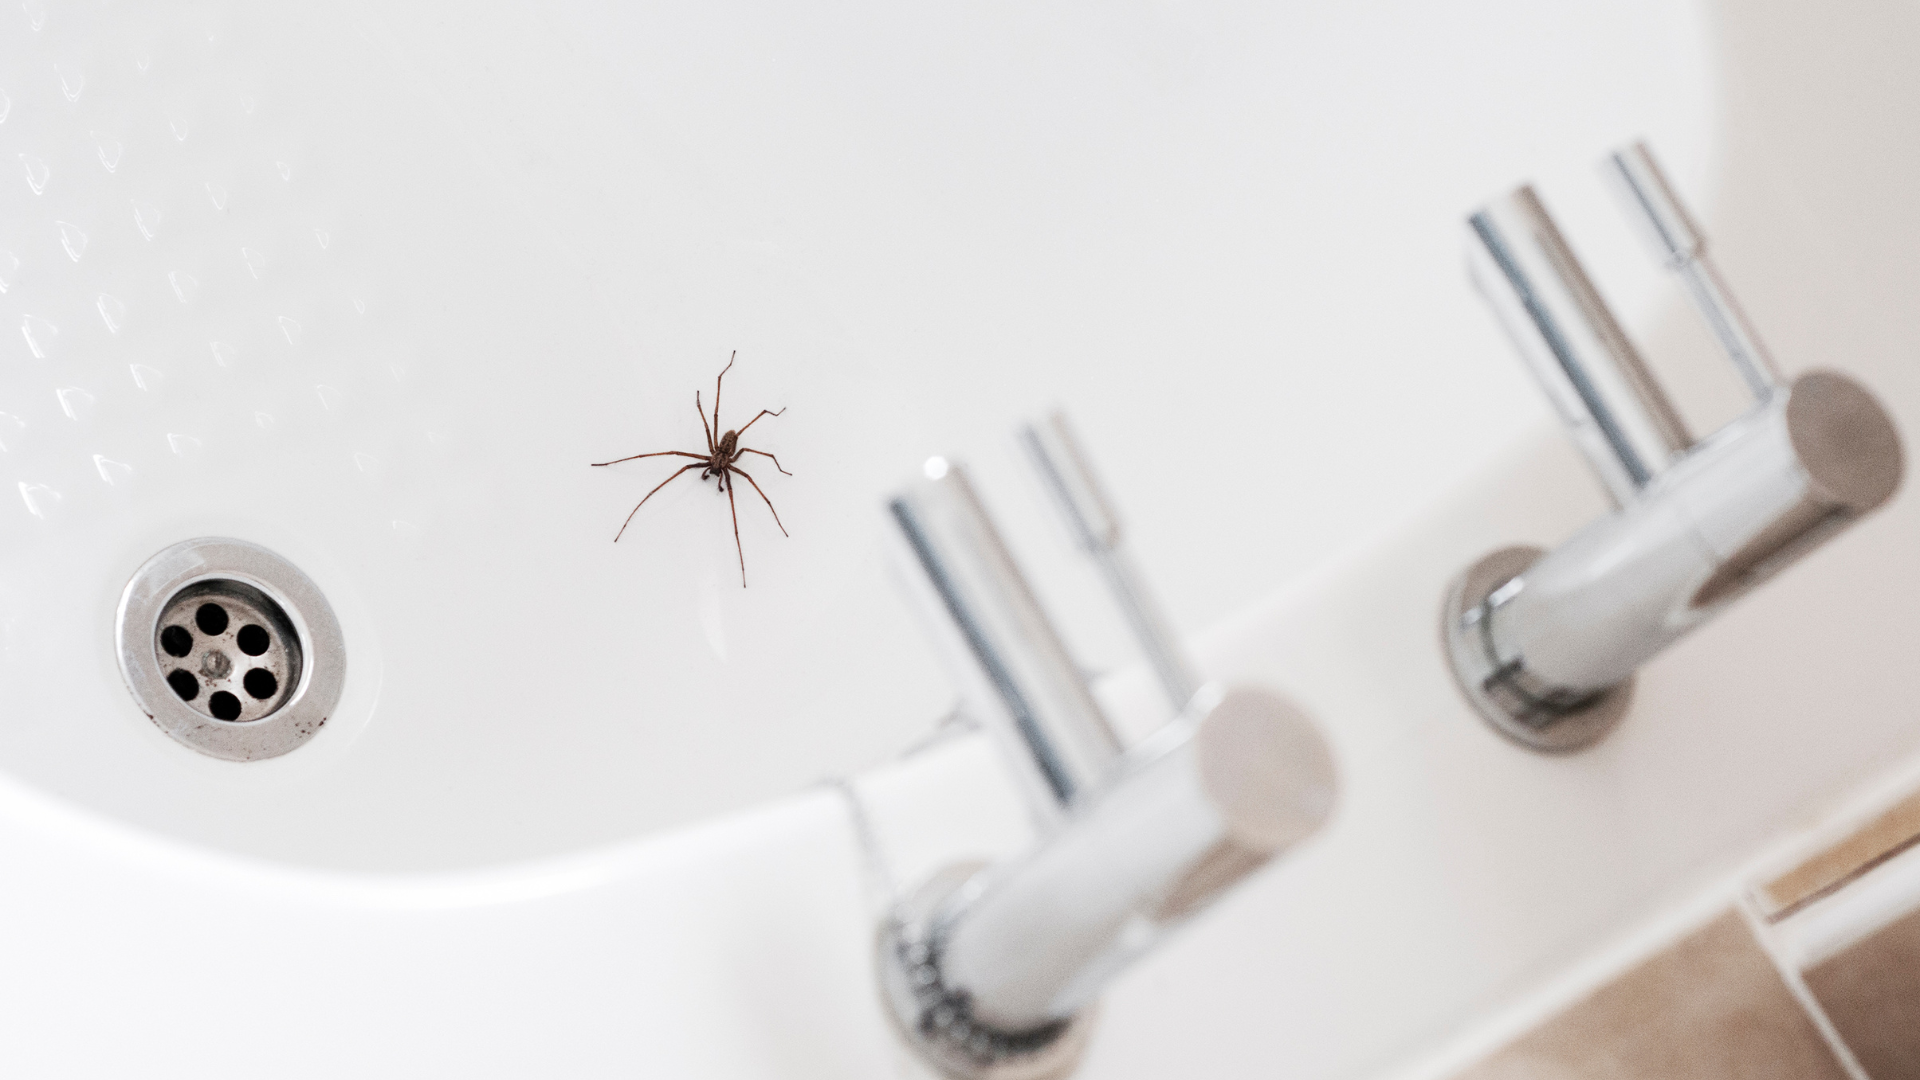 Spiders thrive in undisturbed, cluttered areas